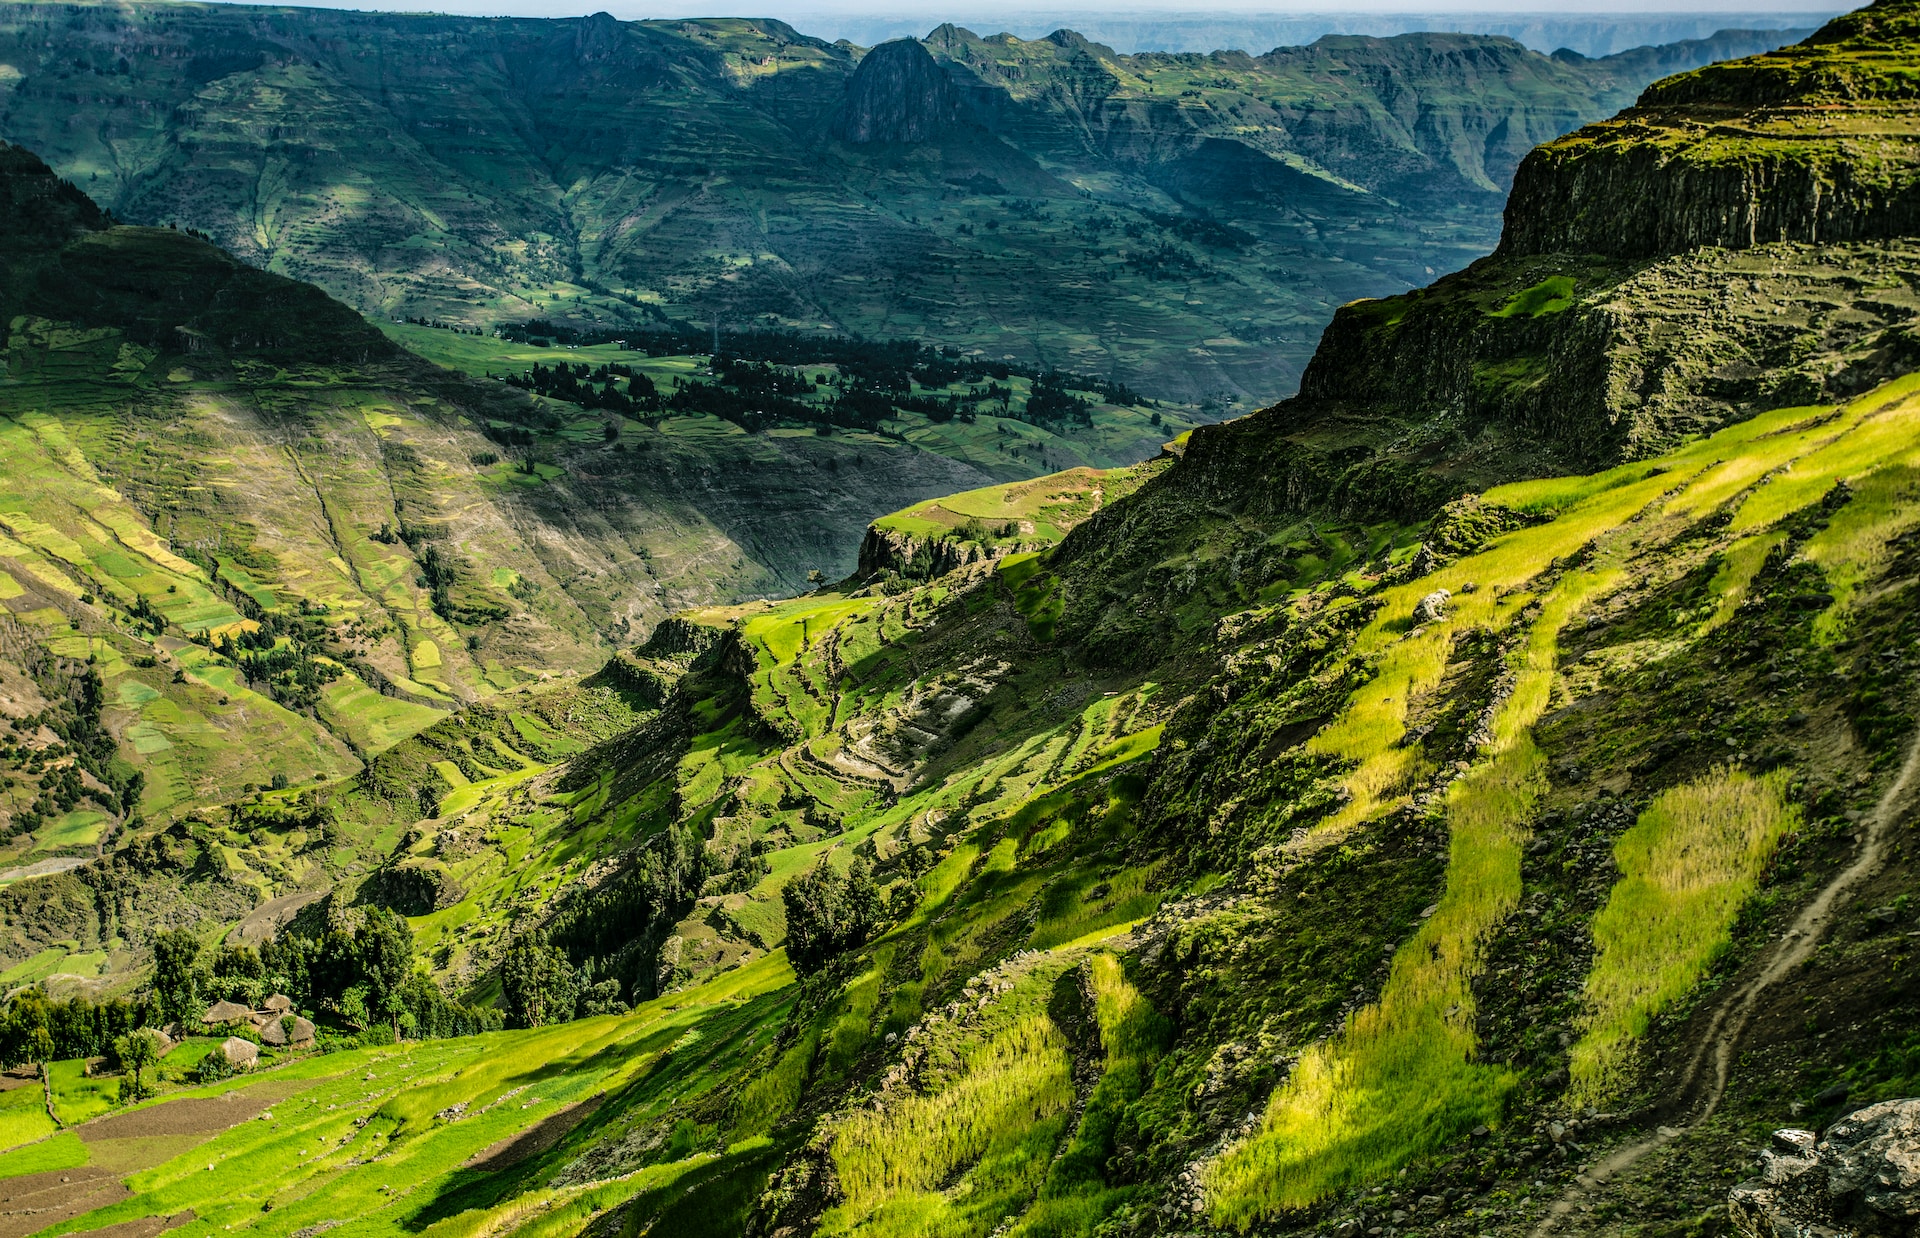 10 Reasons Why Ethiopia Is the Perfect Travel Destination